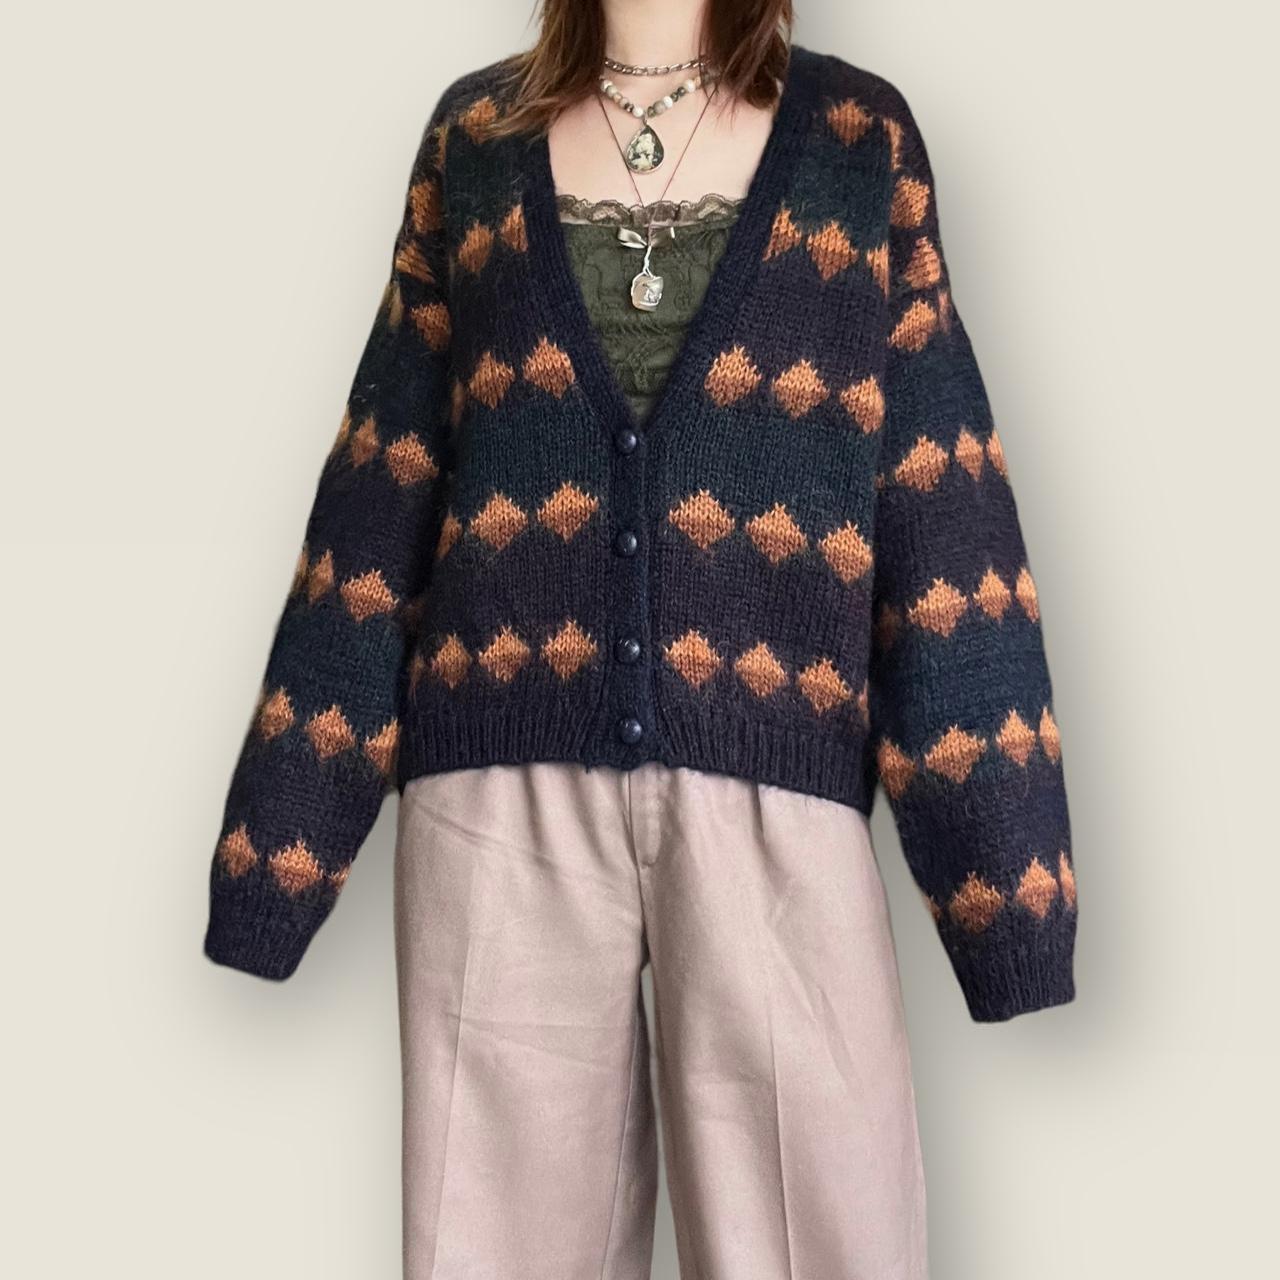 Editions Milano Women's Navy and Tan Cardigan